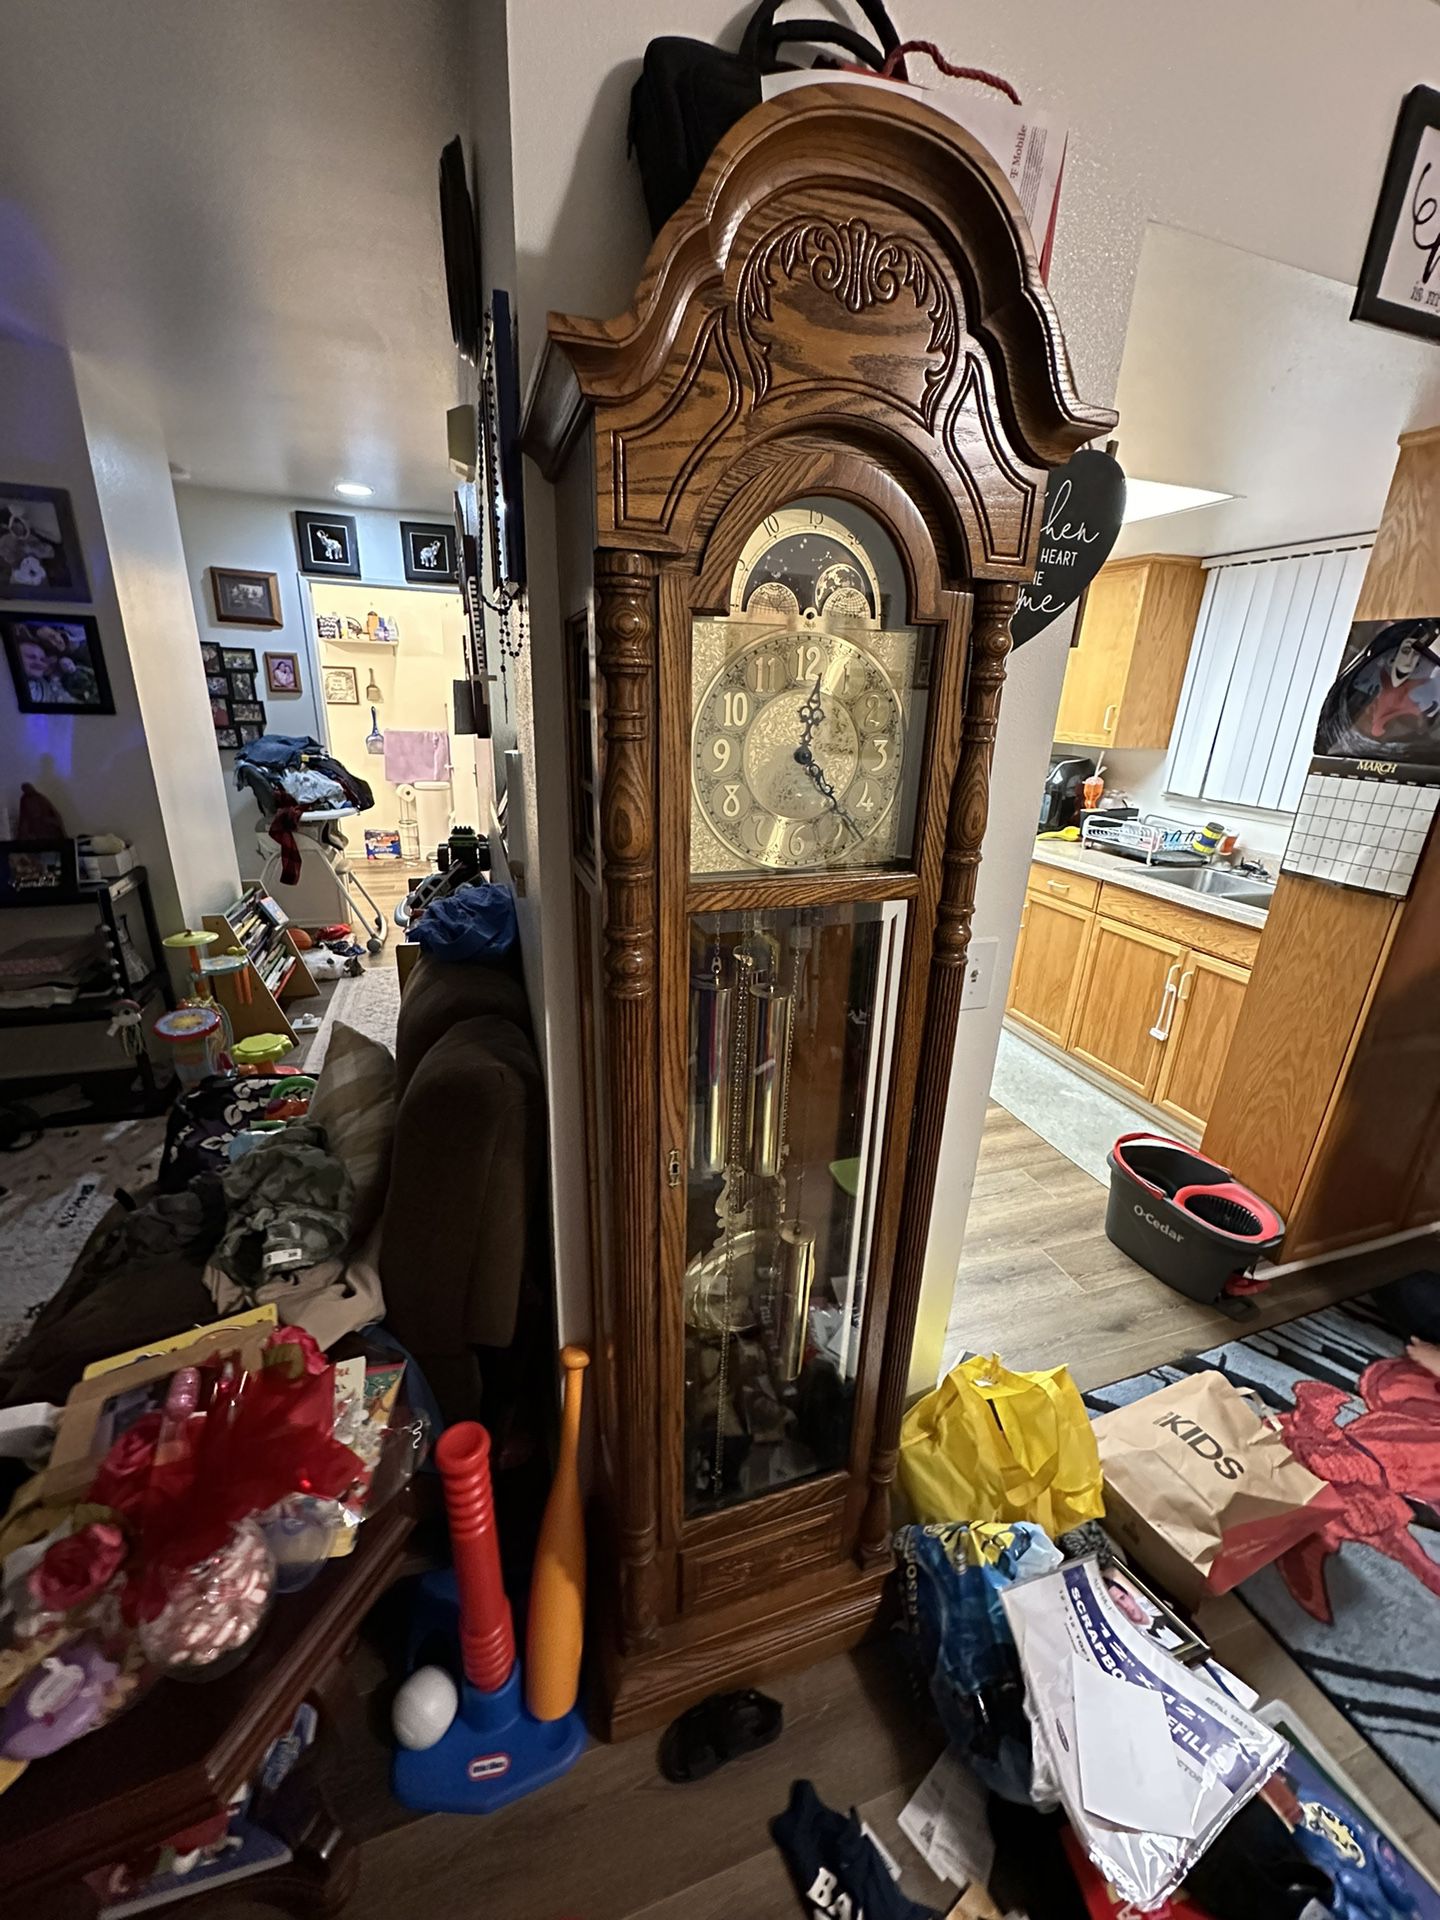 antique howard miller grandfather clock in excellent mechanical and working condition 